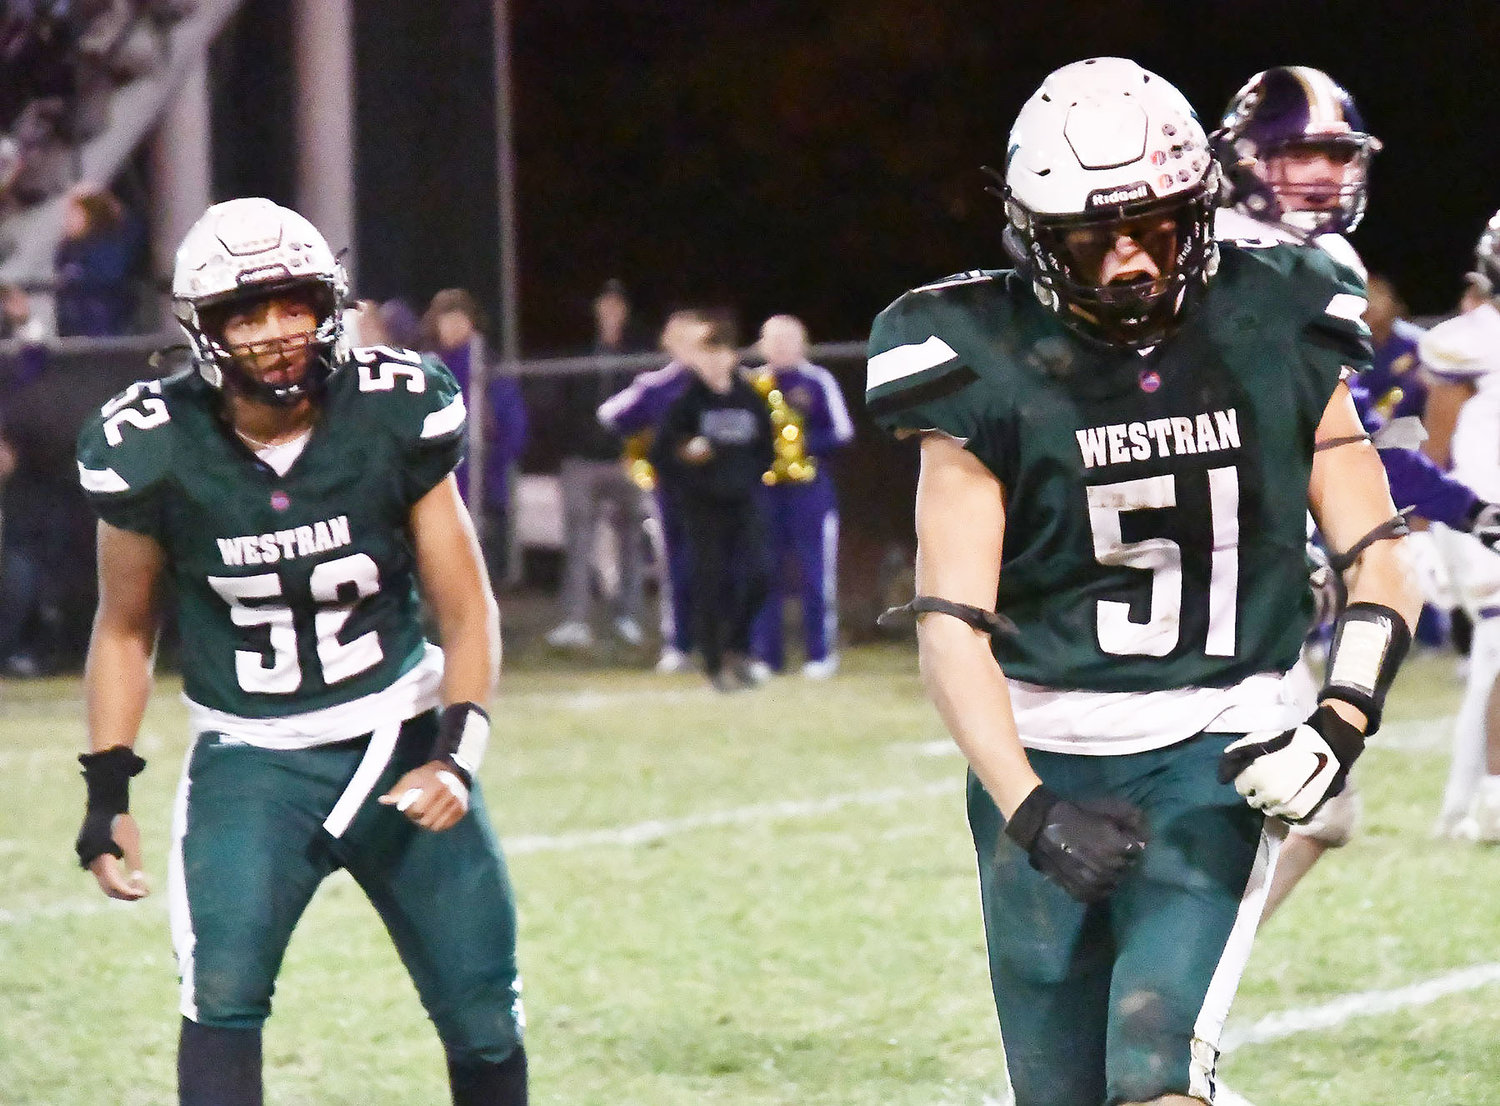 Blake Williams (52) watches Brady Hollman's reaction after Hollman sacked Ryan Binder for an eight-yard loss late in Thursday's Class 1 District 6 first-round game between Westran and Salisbury. The Hornets nipped the Panthers, 16-14.